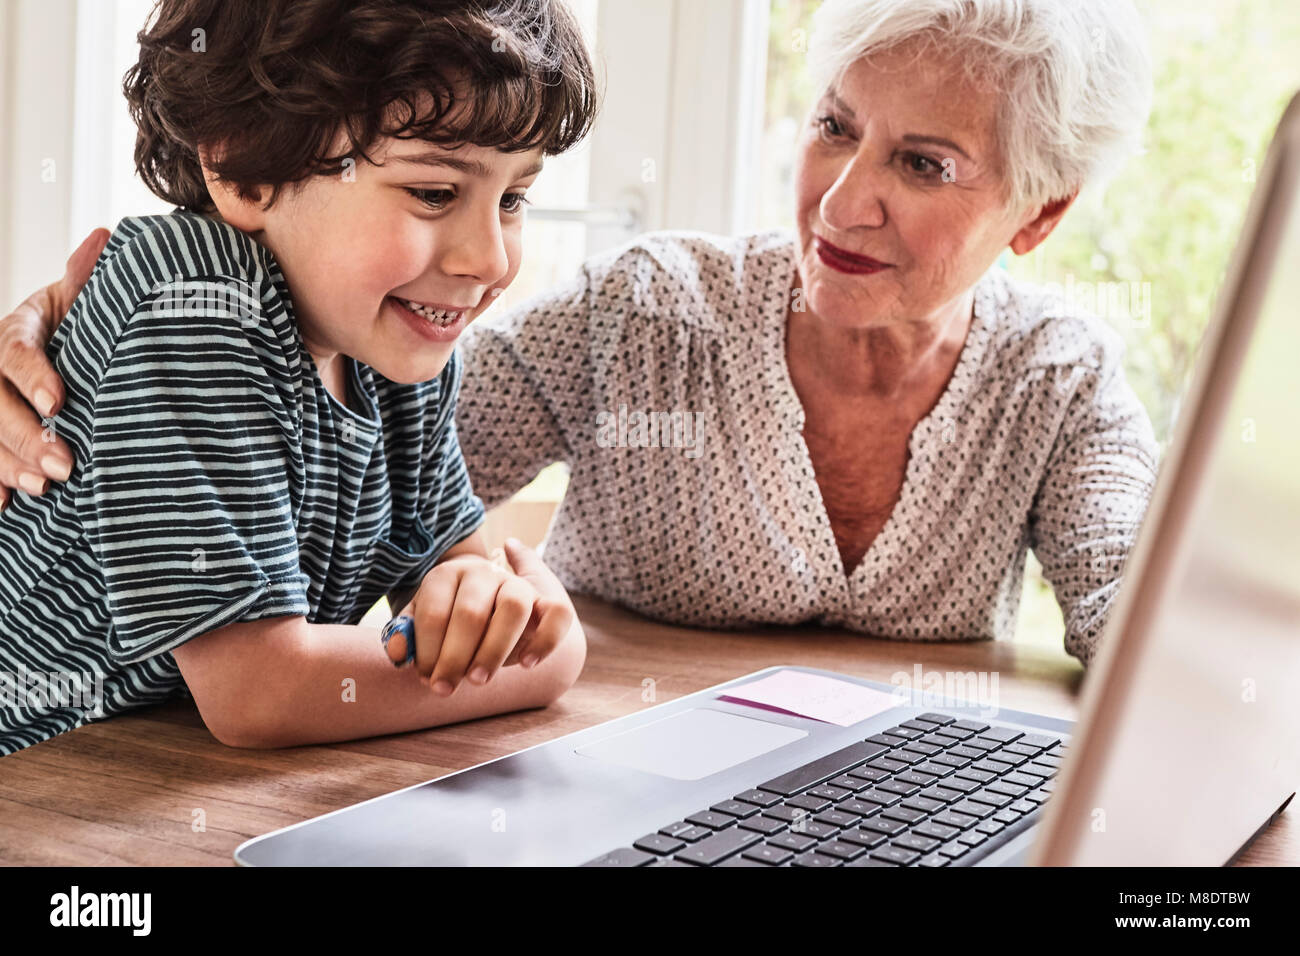 Grandmother and grandson sitting at table, using laptop Stock Photo